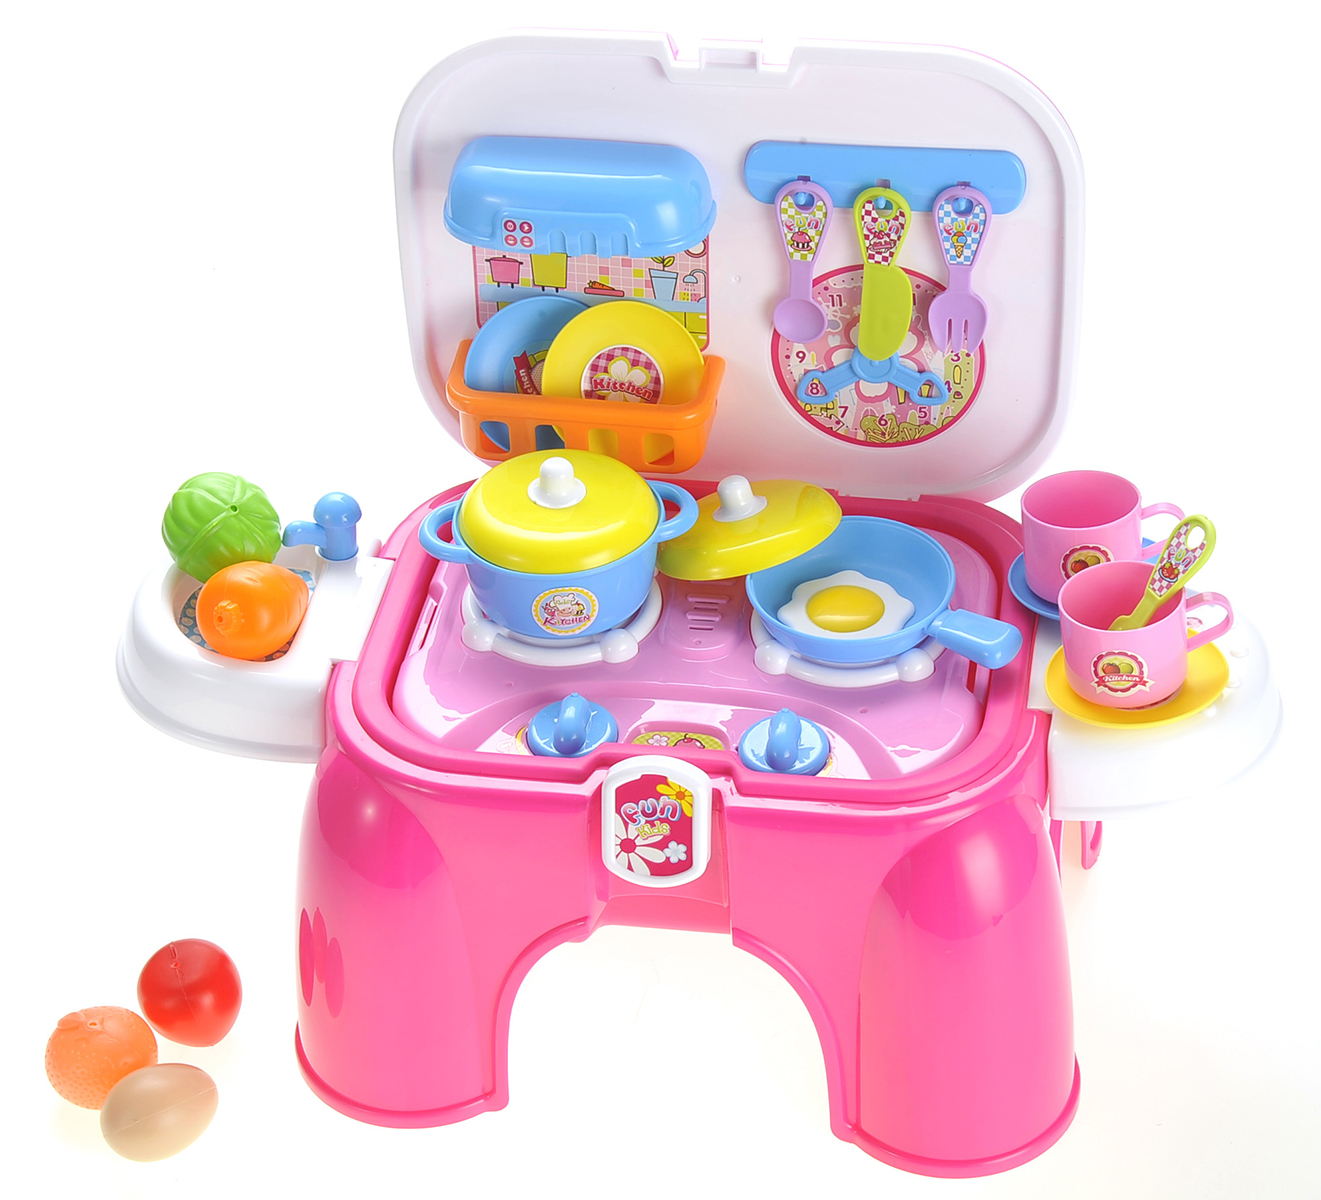 Kitchen Connection Portable Kids Kitchen Cooking Set Toy With Lights And Sounds, Folds Into Stepstool - image 1 of 8